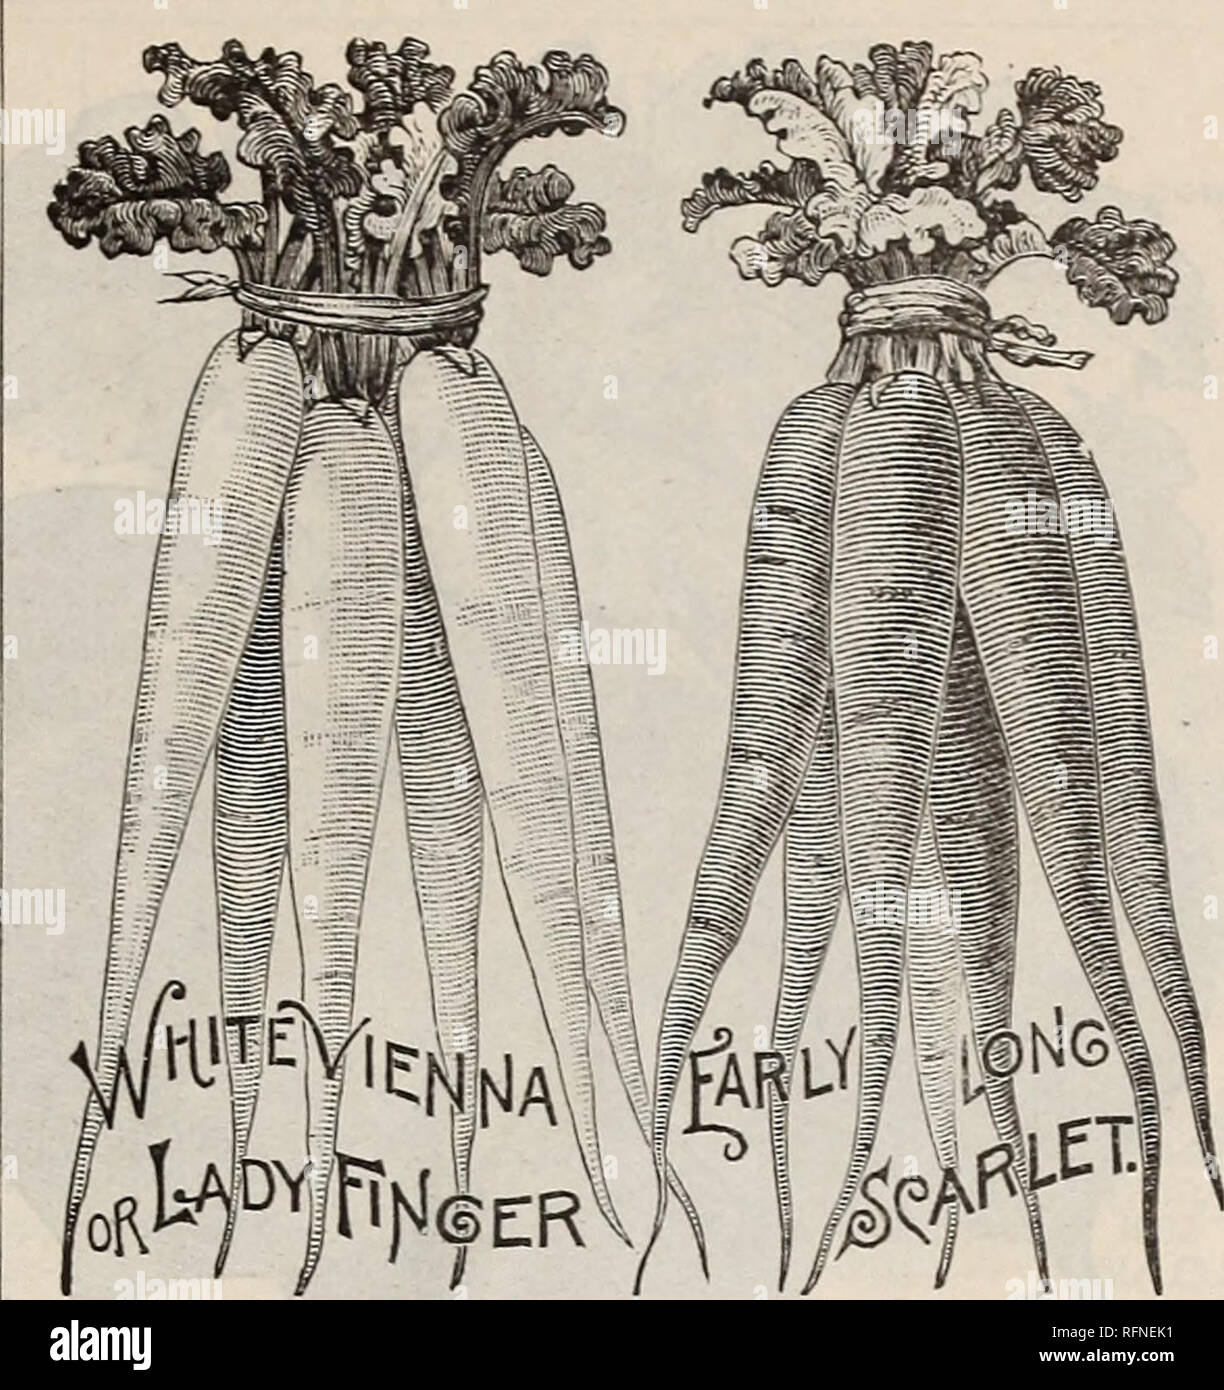 . Burpee's farm annual written at Fordhook Farm. Nurseries (Horticulture) Pennsylvania Philadelphia Catalogs; Vegetables Seeds Catalogs; Plants, Ornamental Catalogs; Flowers Seeds Catalogs. New Earliest White Radish. First introduced from France last year, this is undoubtedly the earliest White Radish in cultivation, —in fact, at Fordhook it was the earliest of all Ra- dishes. The beautiful little radishes, of the size and form shown in the illus- tration, are ready for the table in only eighteen to twenty days from sowing the seed. Of handsome olive shape; both skin and flesh are white, of cl Stock Photo